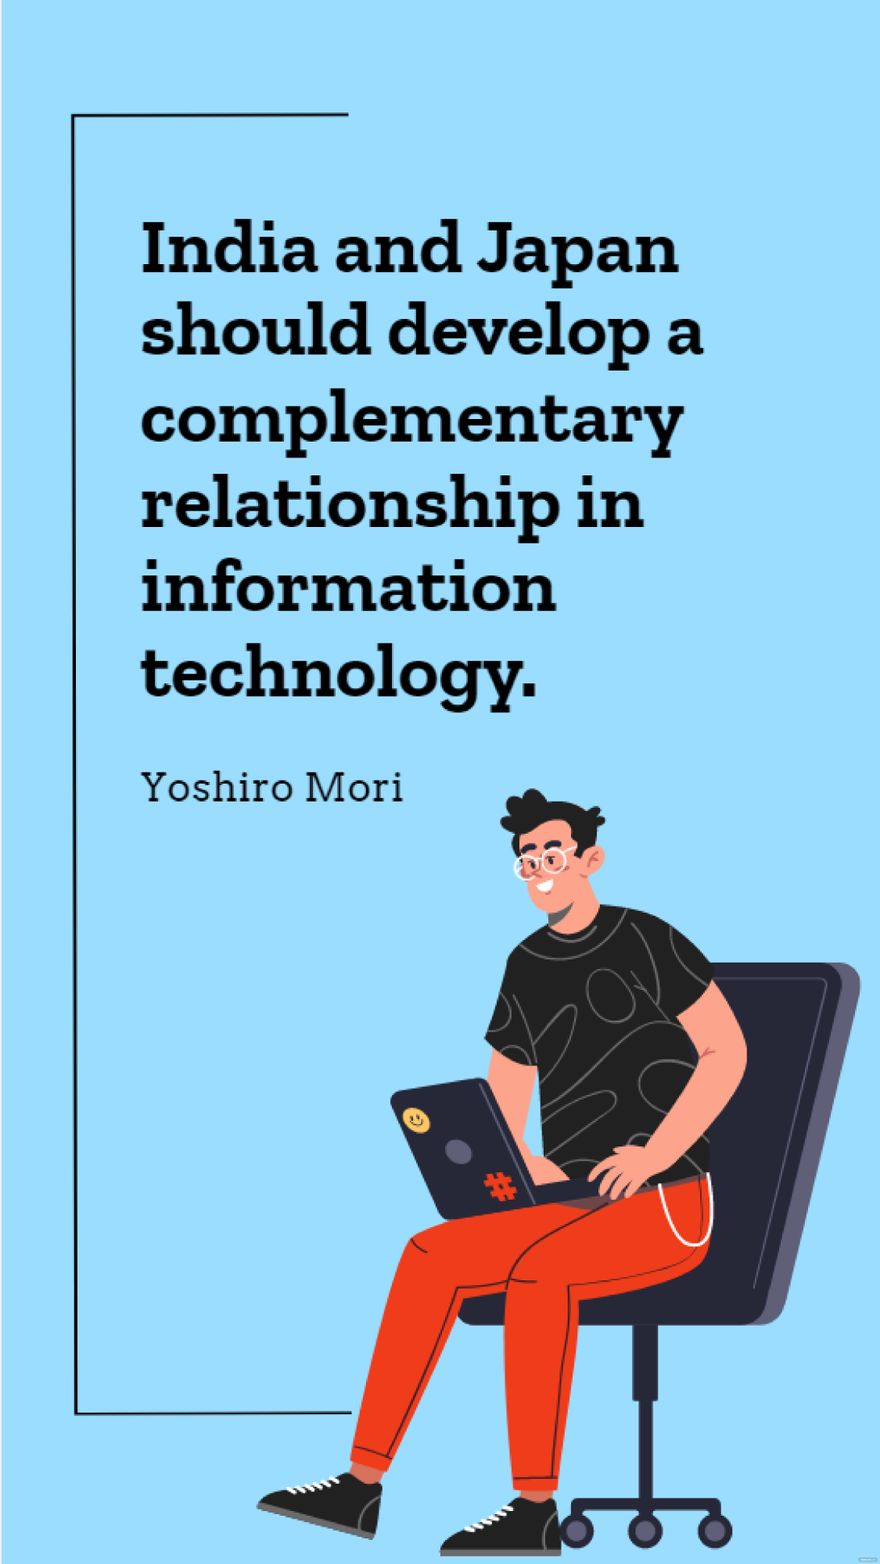 Yoshiro Mori - India and Japan should develop a complementary relationship in information technology.